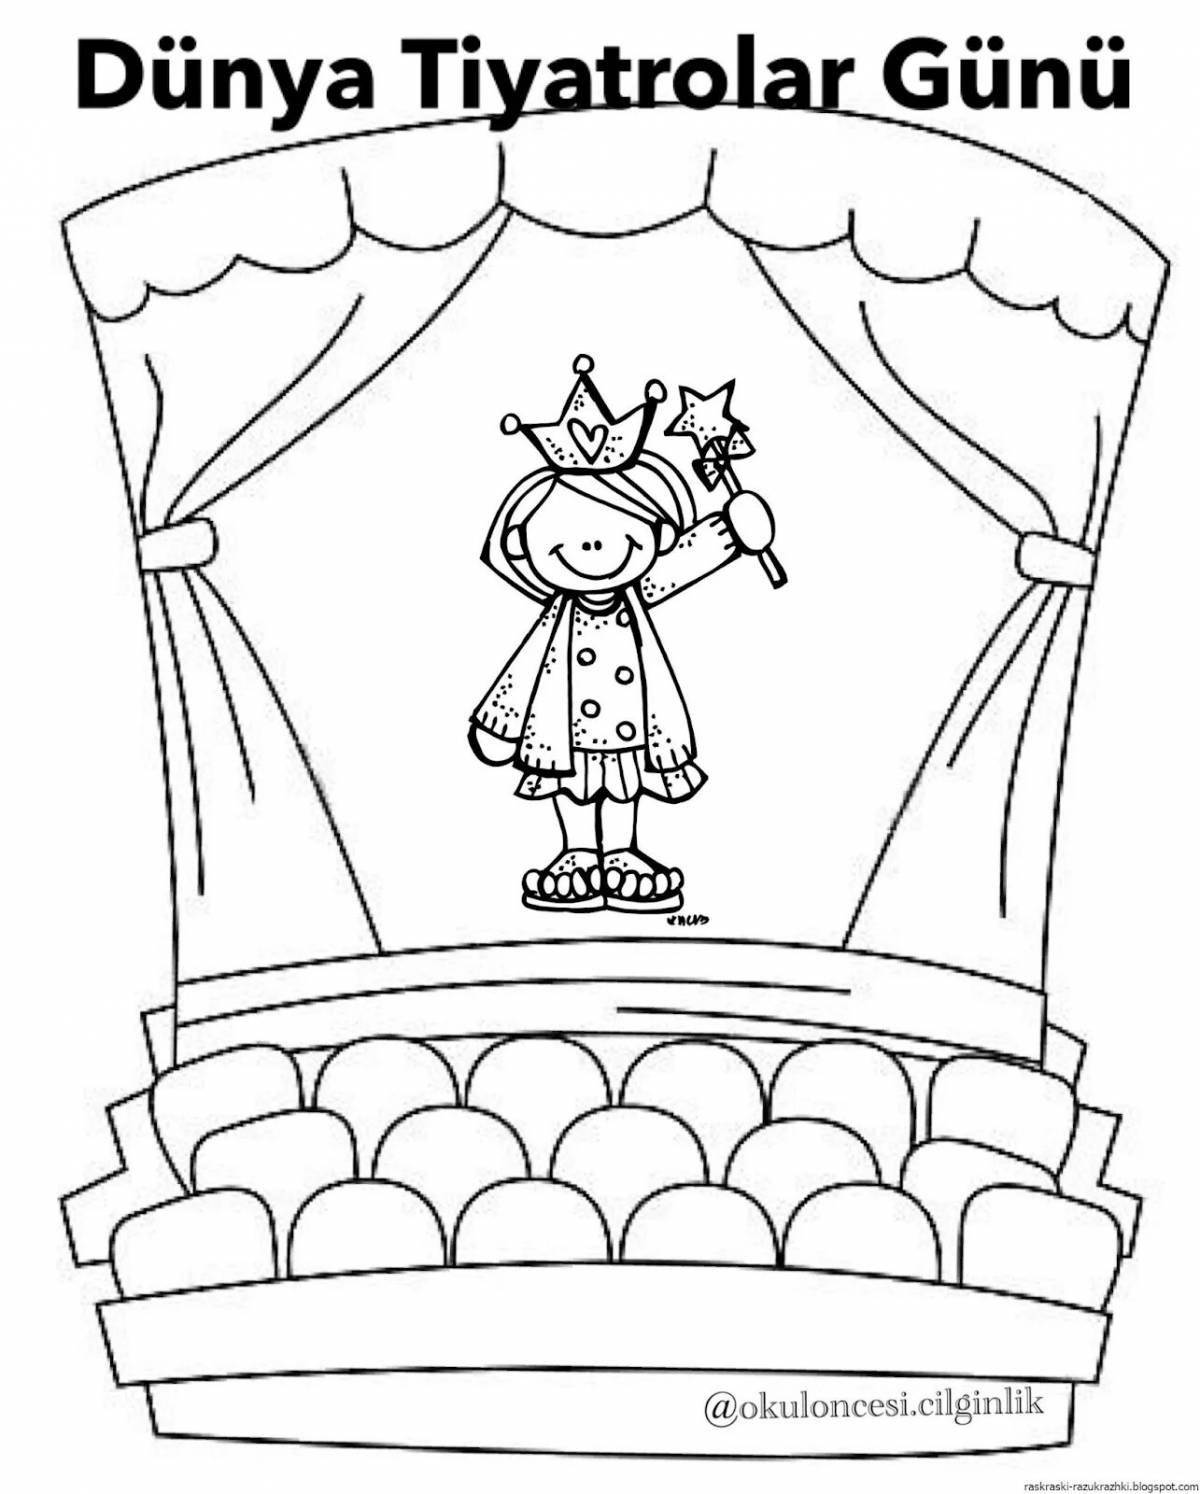 Adorable puppet theater coloring page